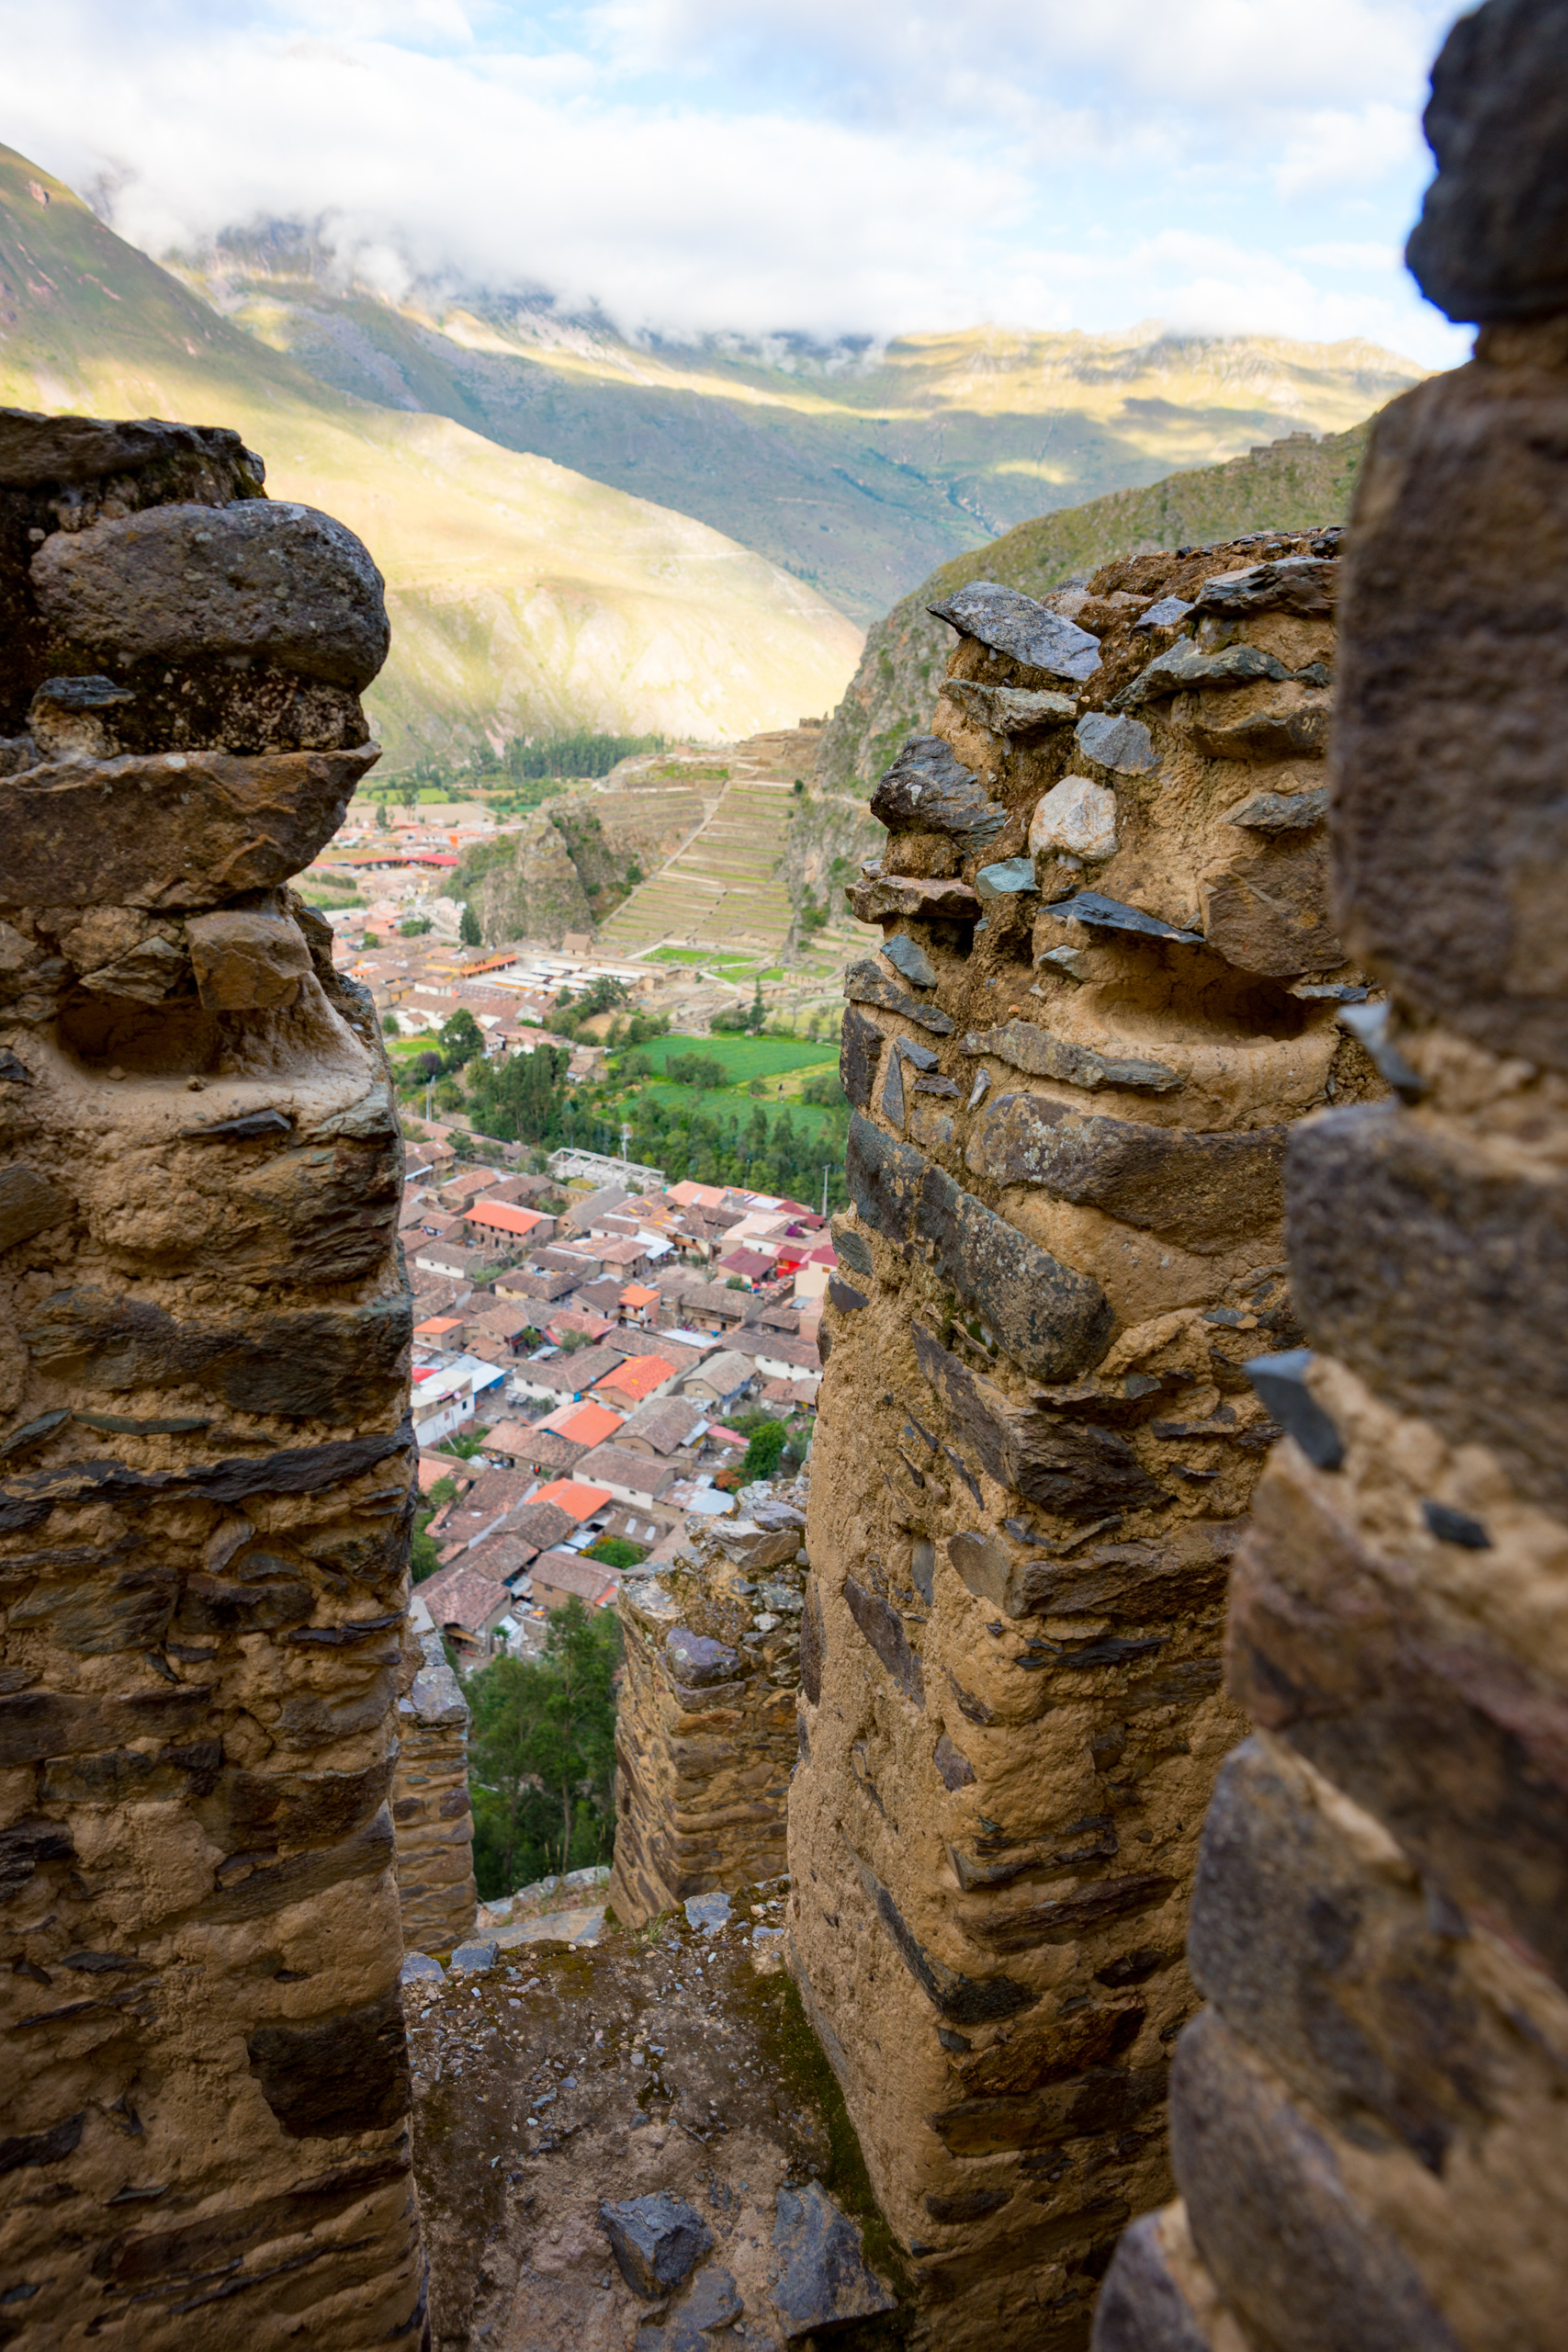 Looking down over Ollantaytambo from the storage buildings.